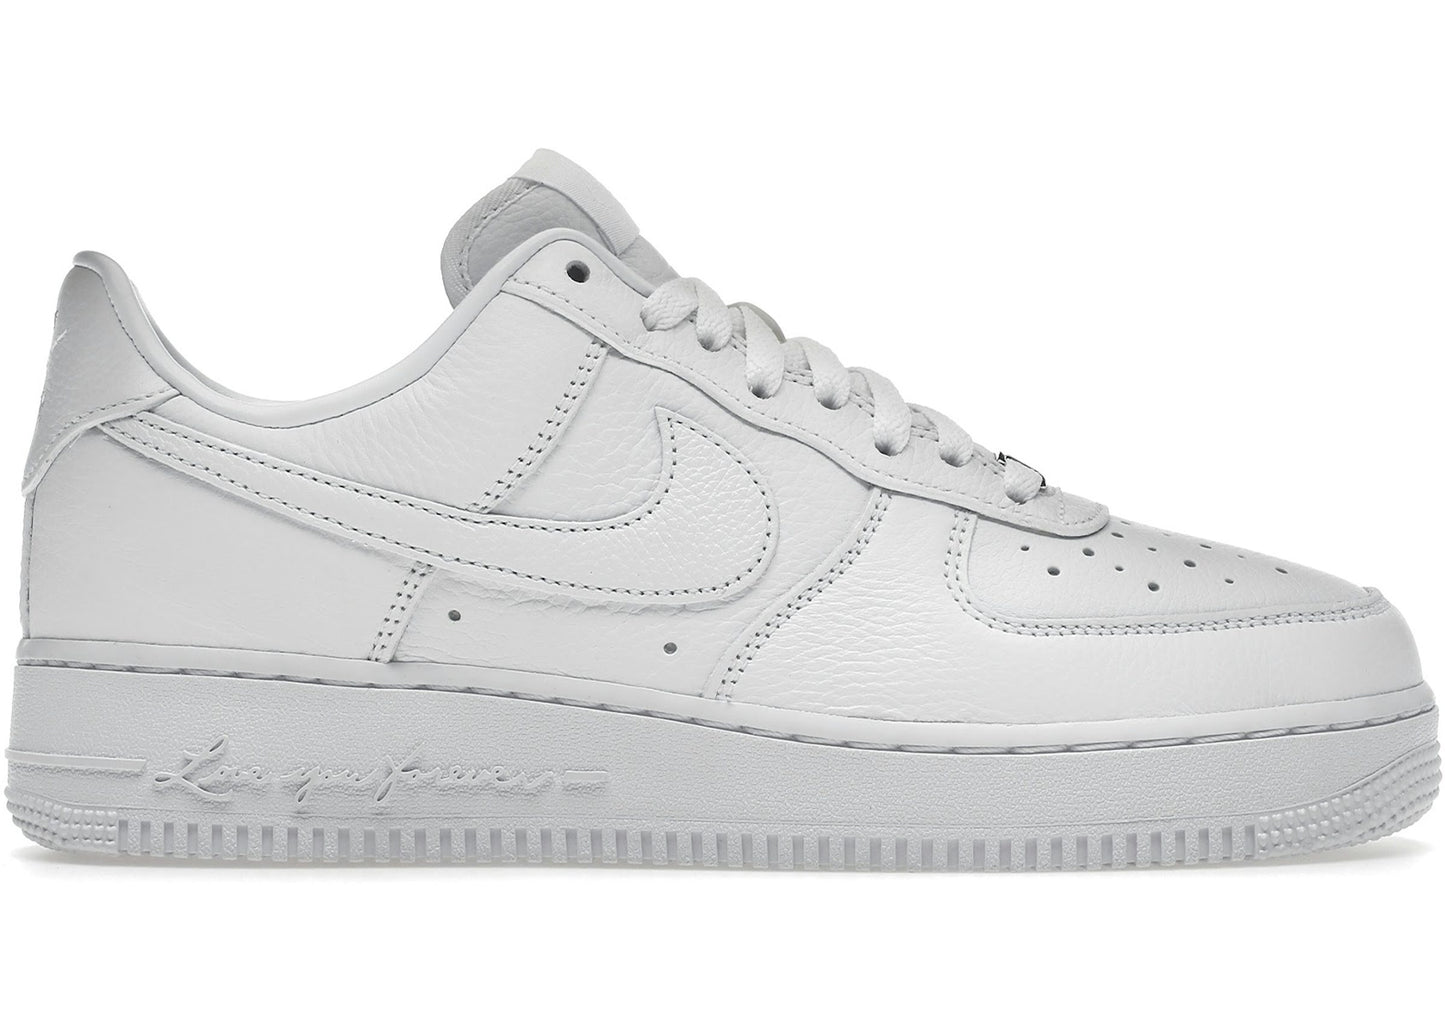 Nocta X Nike Air Force 1 Low ' Certified Lover Boy'